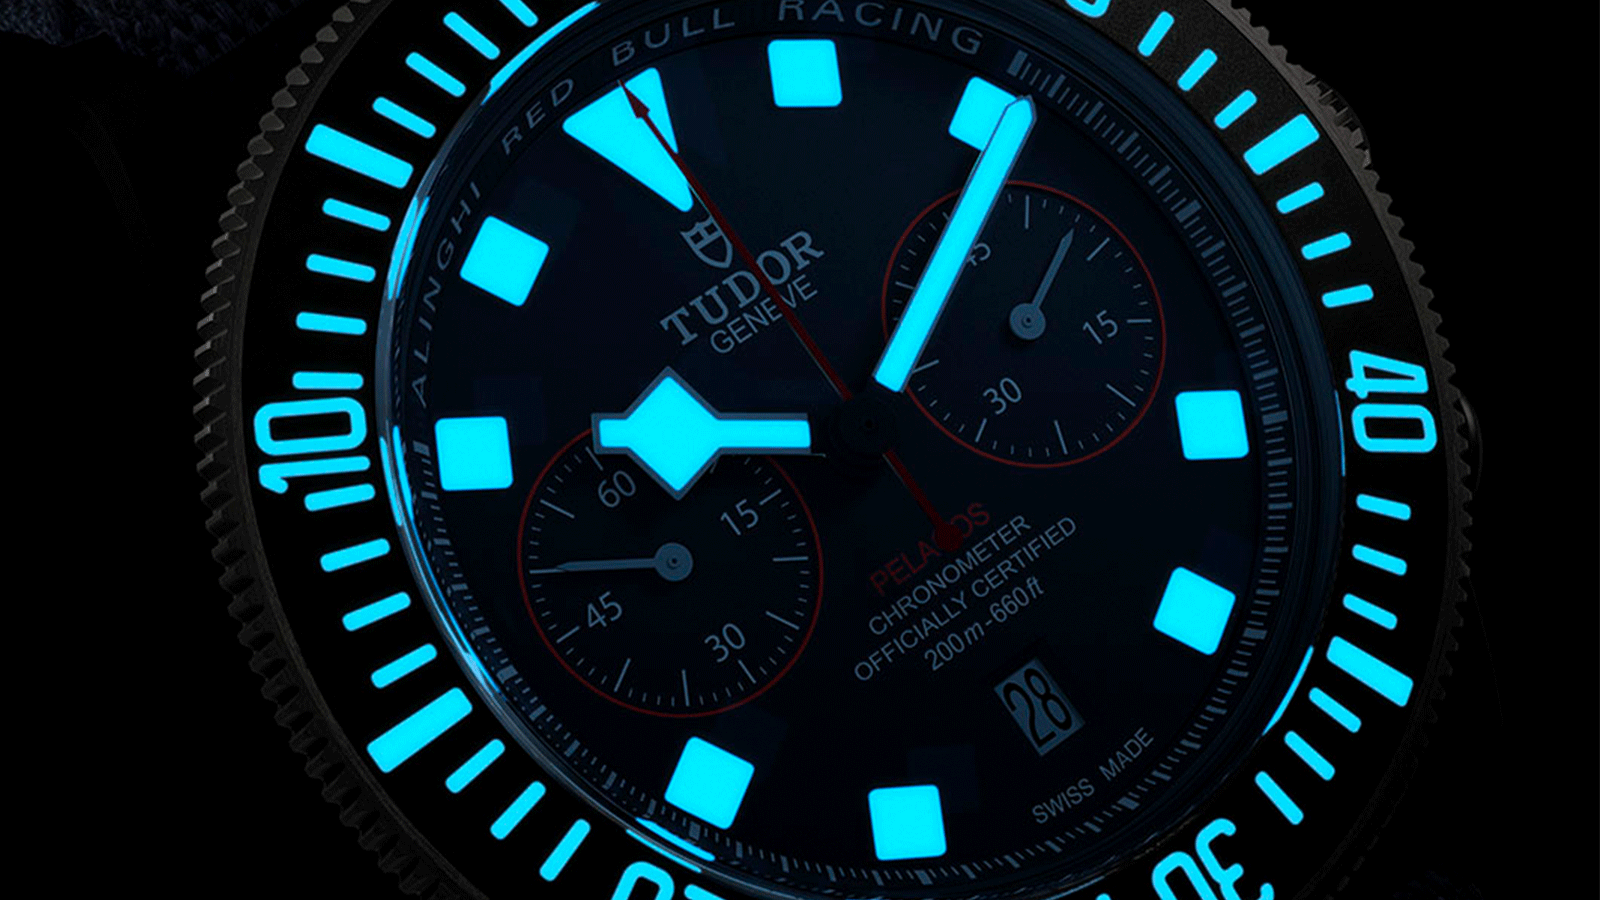 The dial on the new TUDOR Pelagos FXD Chrono "Alinghi Red Bull Racing Edition" features the luminous material Swiss Super-LumiNova® Grade X1 – showing a performance increase of up to 60% after two hours compared to standard grades.